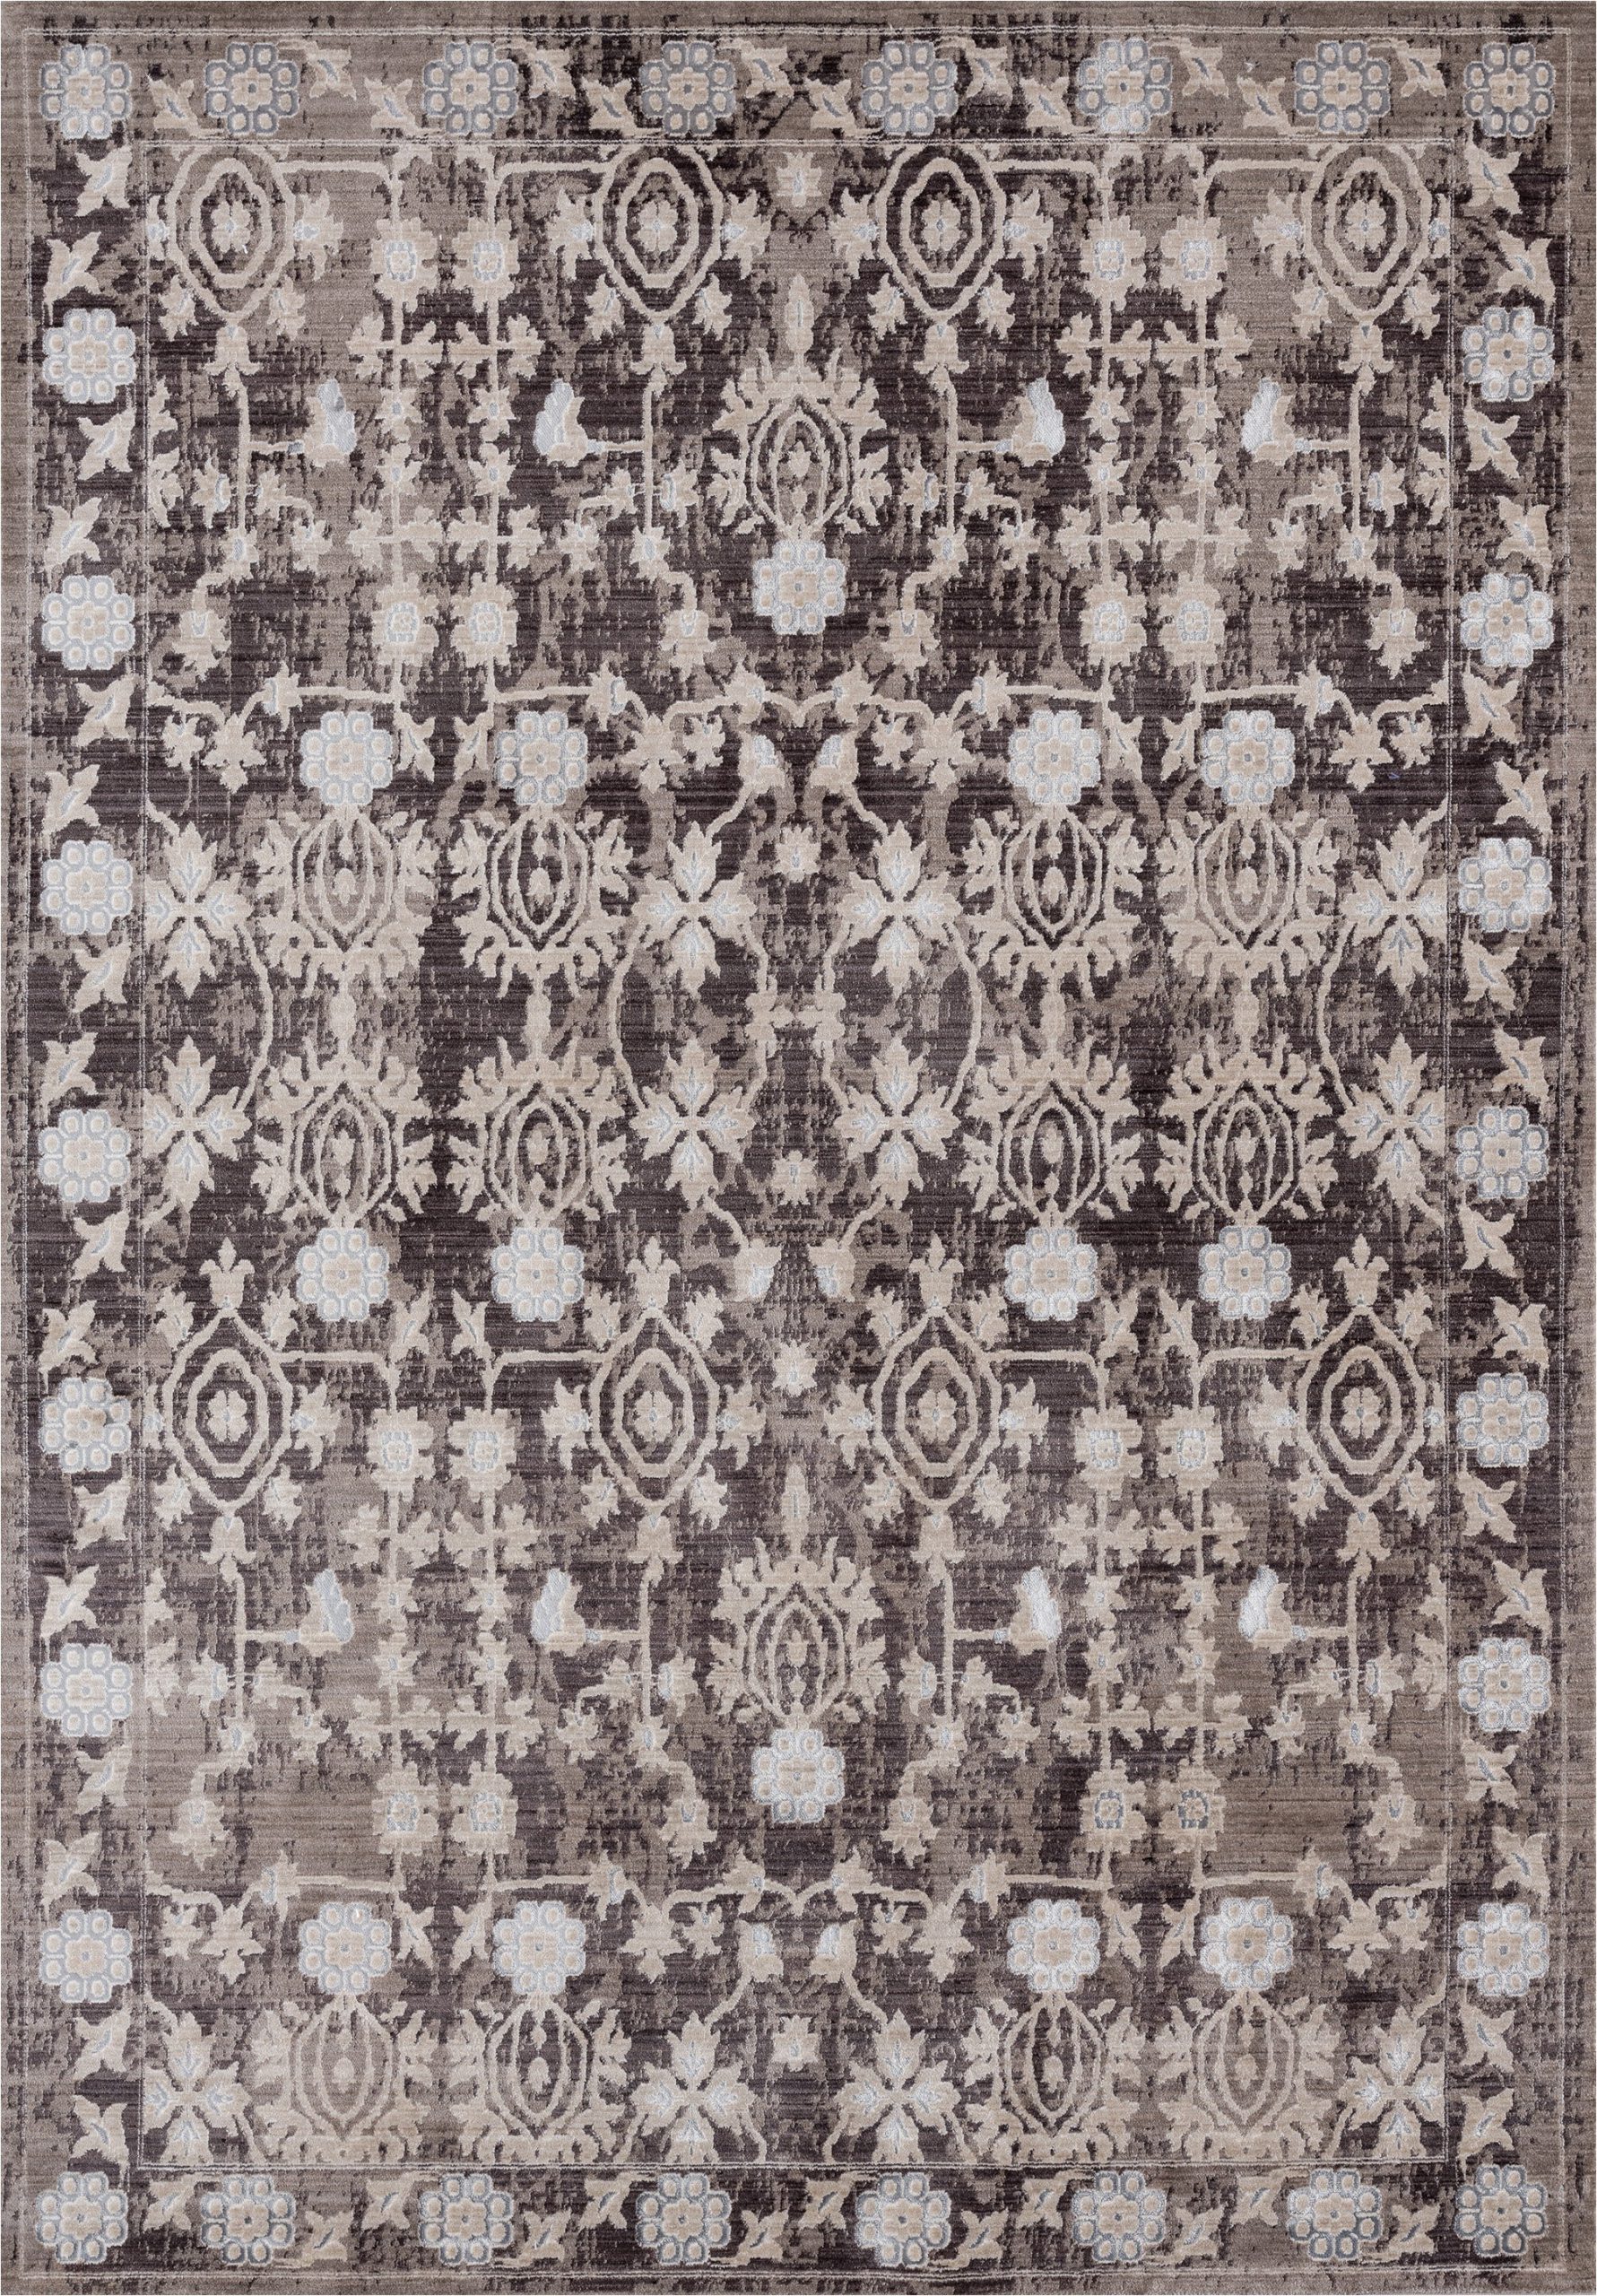 Taupe and Brown area Rug Rummond Taupe Brown area Rug